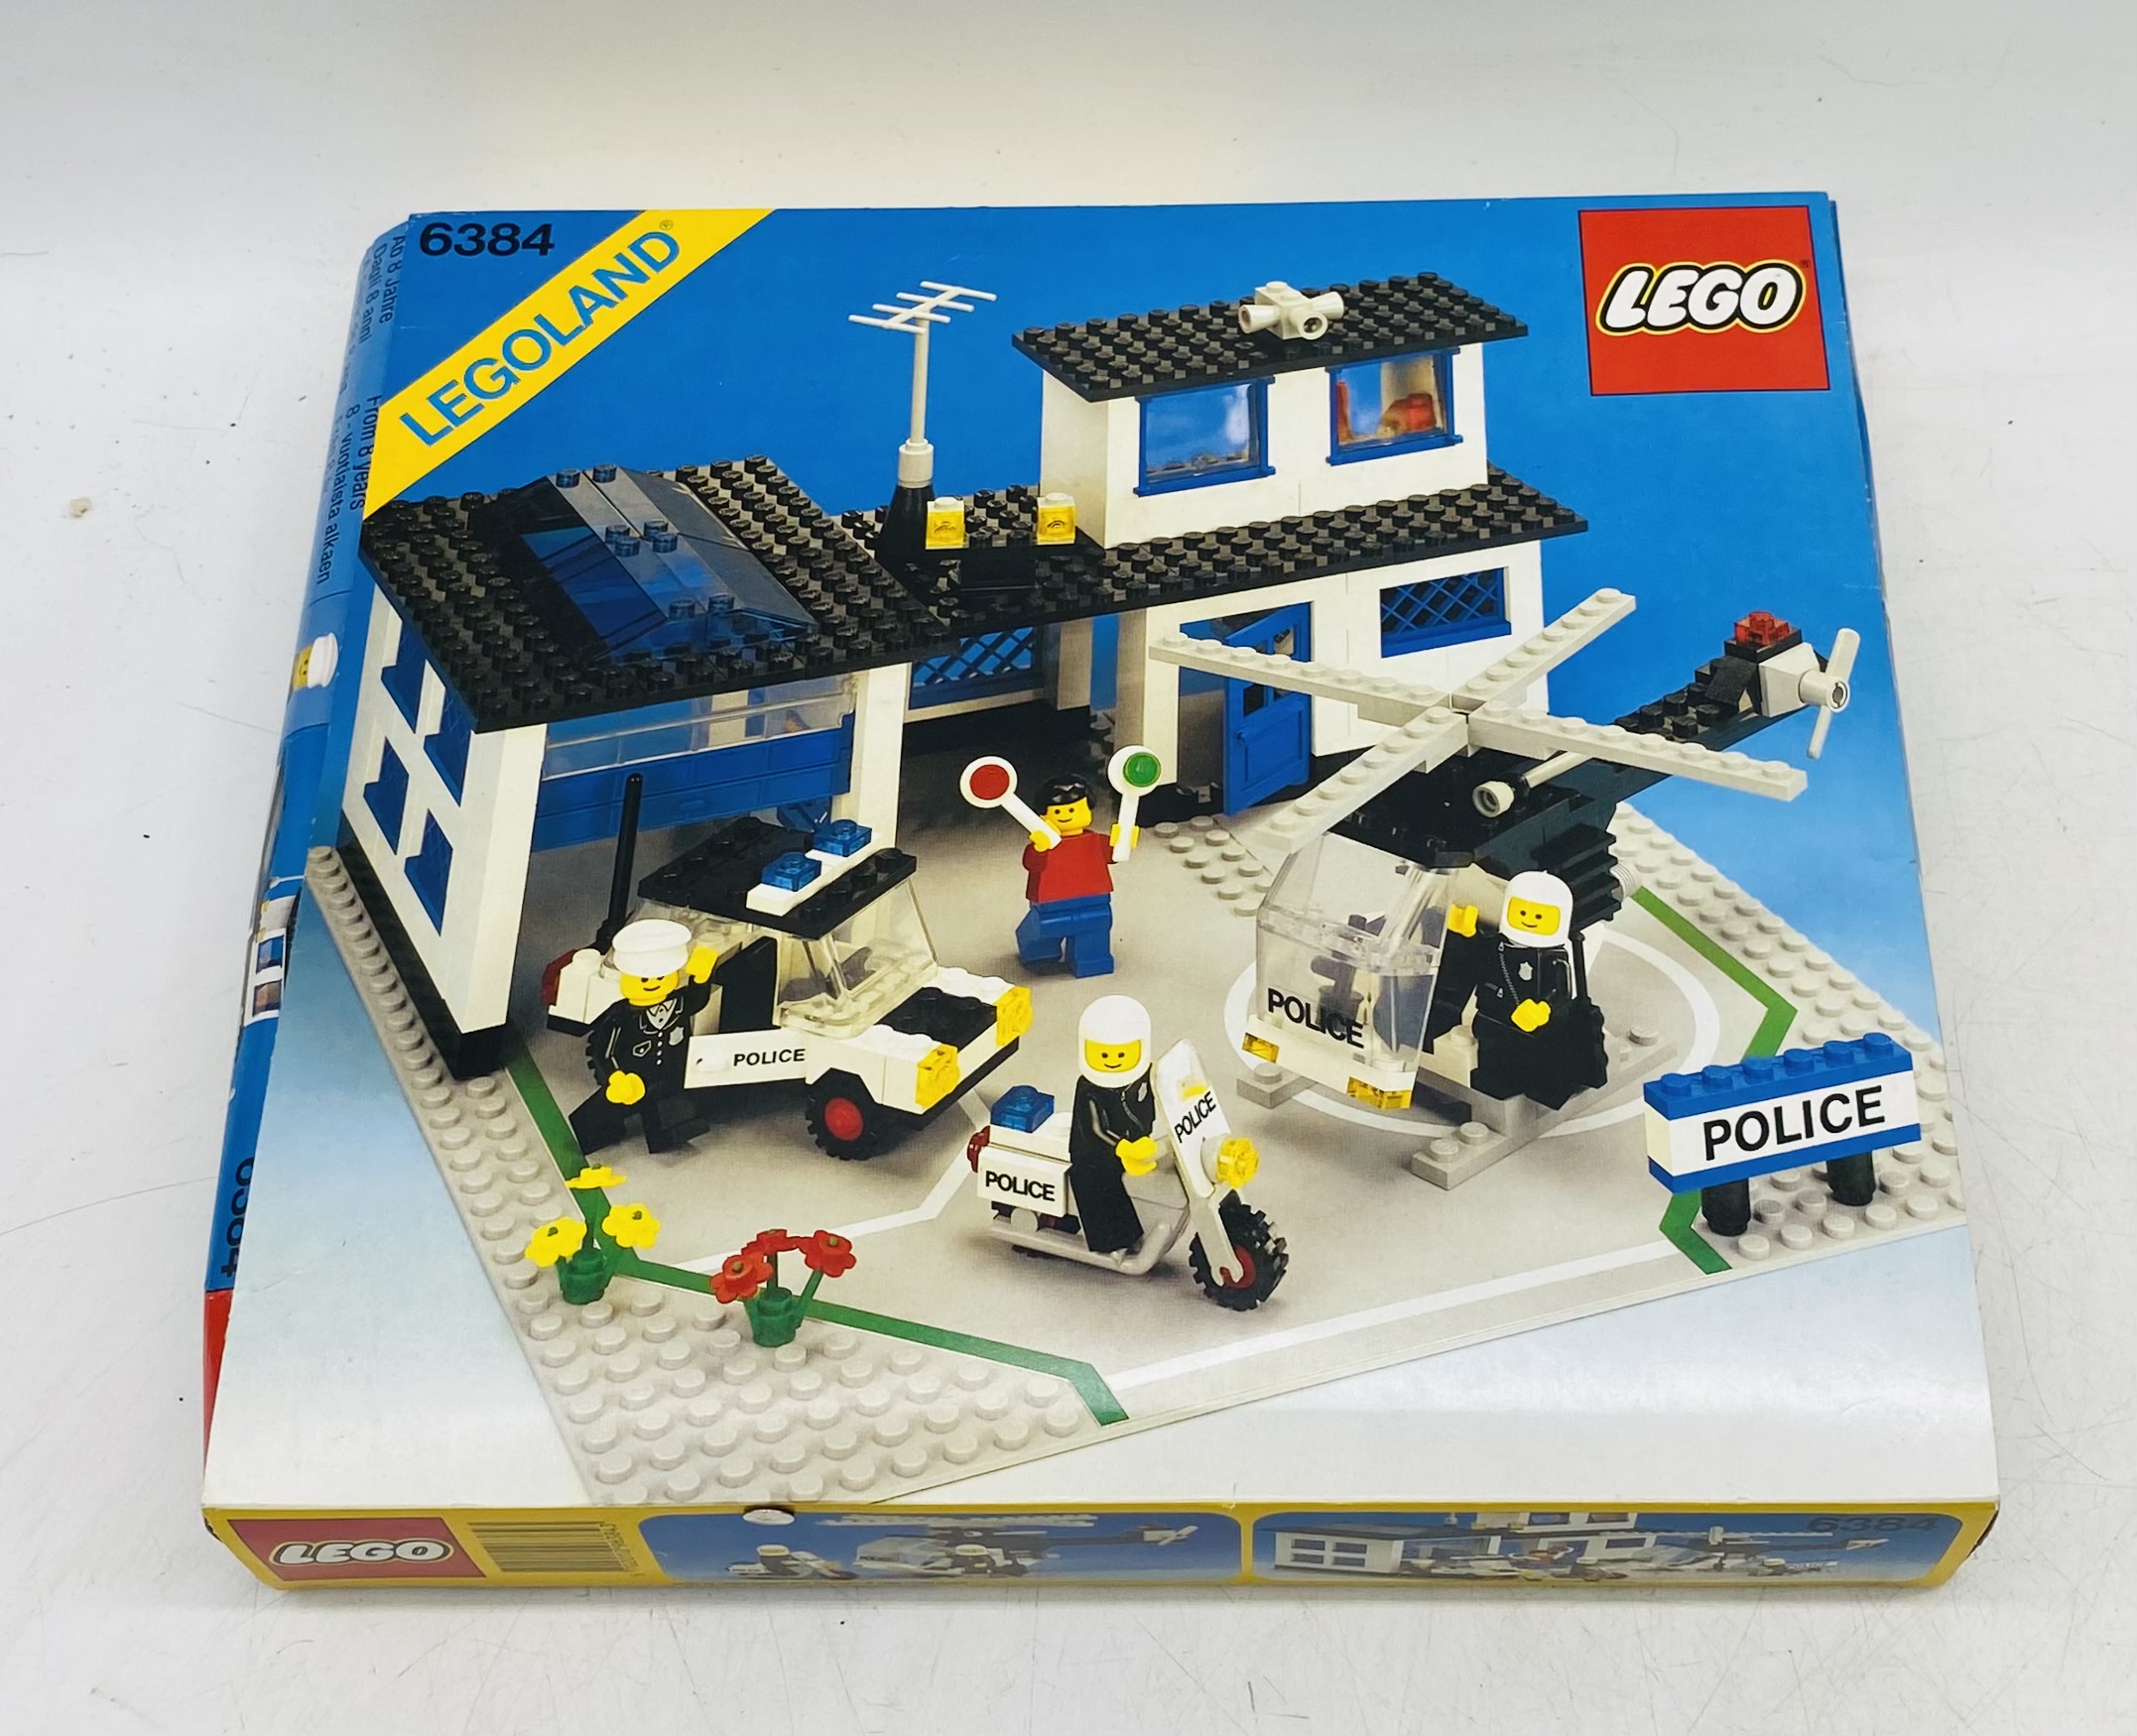 Four boxed 1980's Lego Legoland sets including Fire Station (6382), Police Station (6384) Police - Image 2 of 6